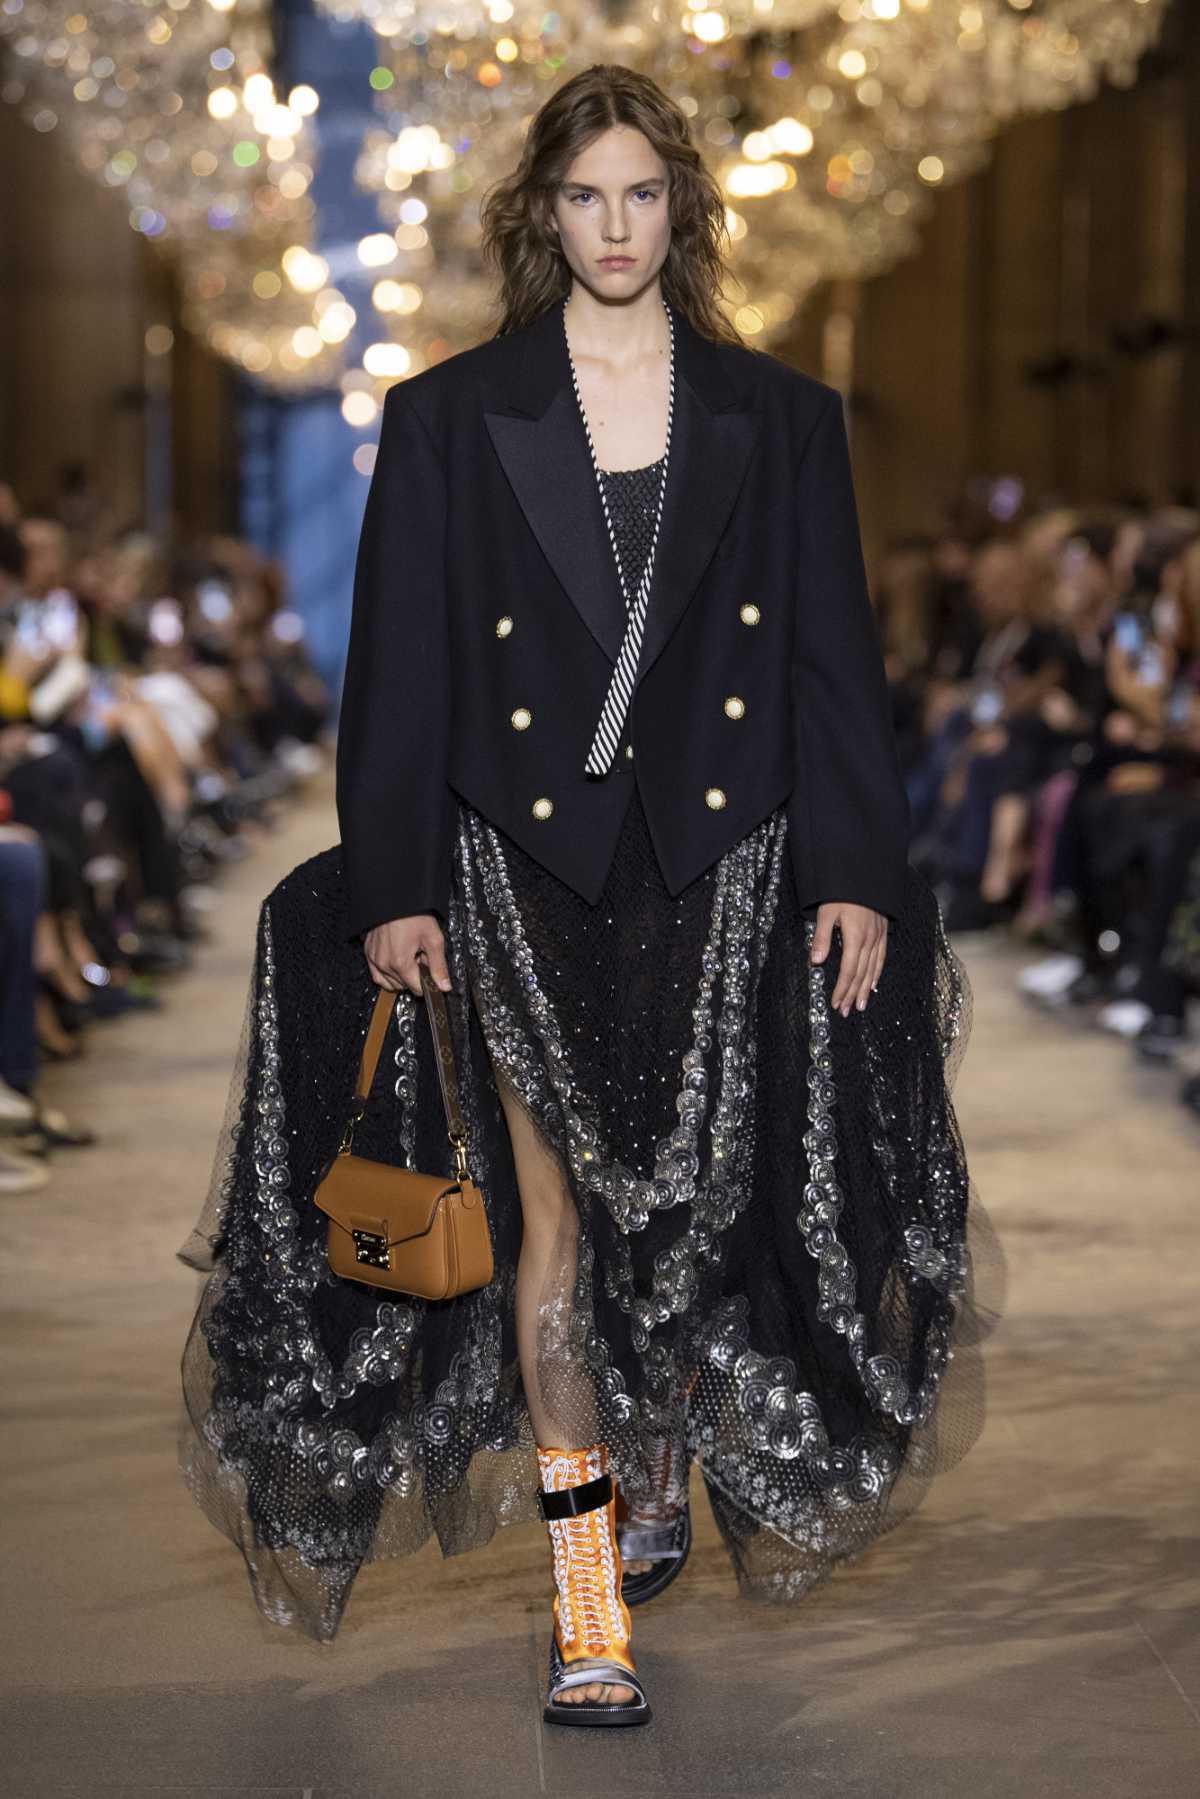 Louis Vuitton Presents Its New Spring-Summer 2022 Women's Collection